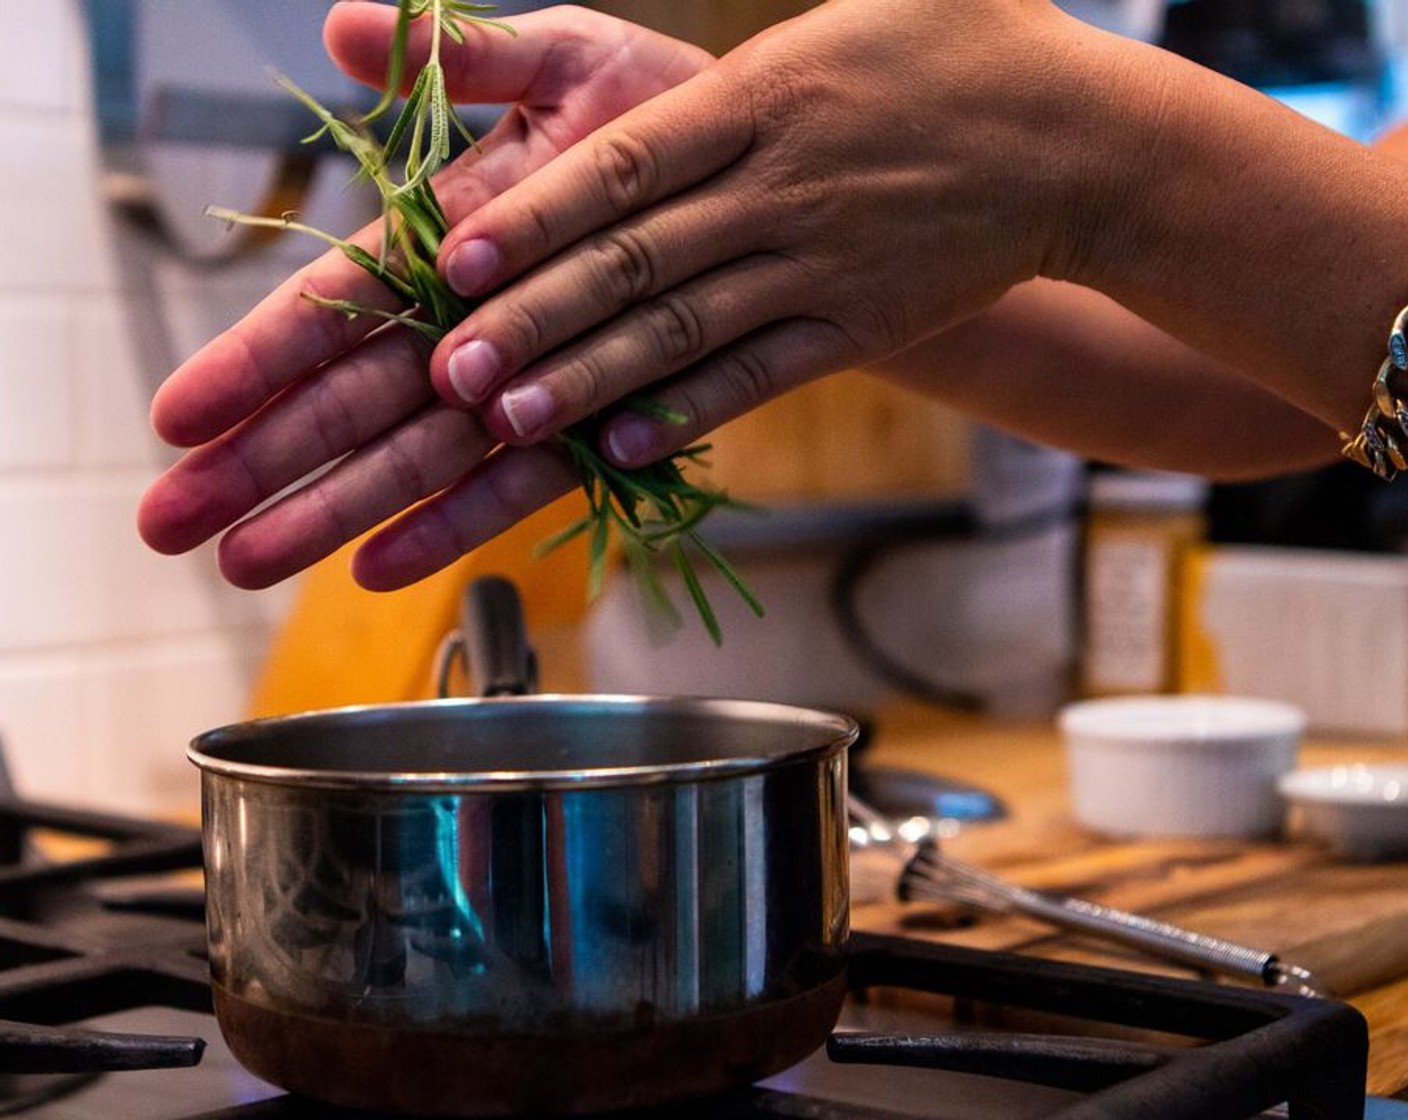 step 2 Gently roll the Fresh Rosemary (1 sprig) between your hands to release the essential oils, add them into the saucepan. Stir until aromatic.